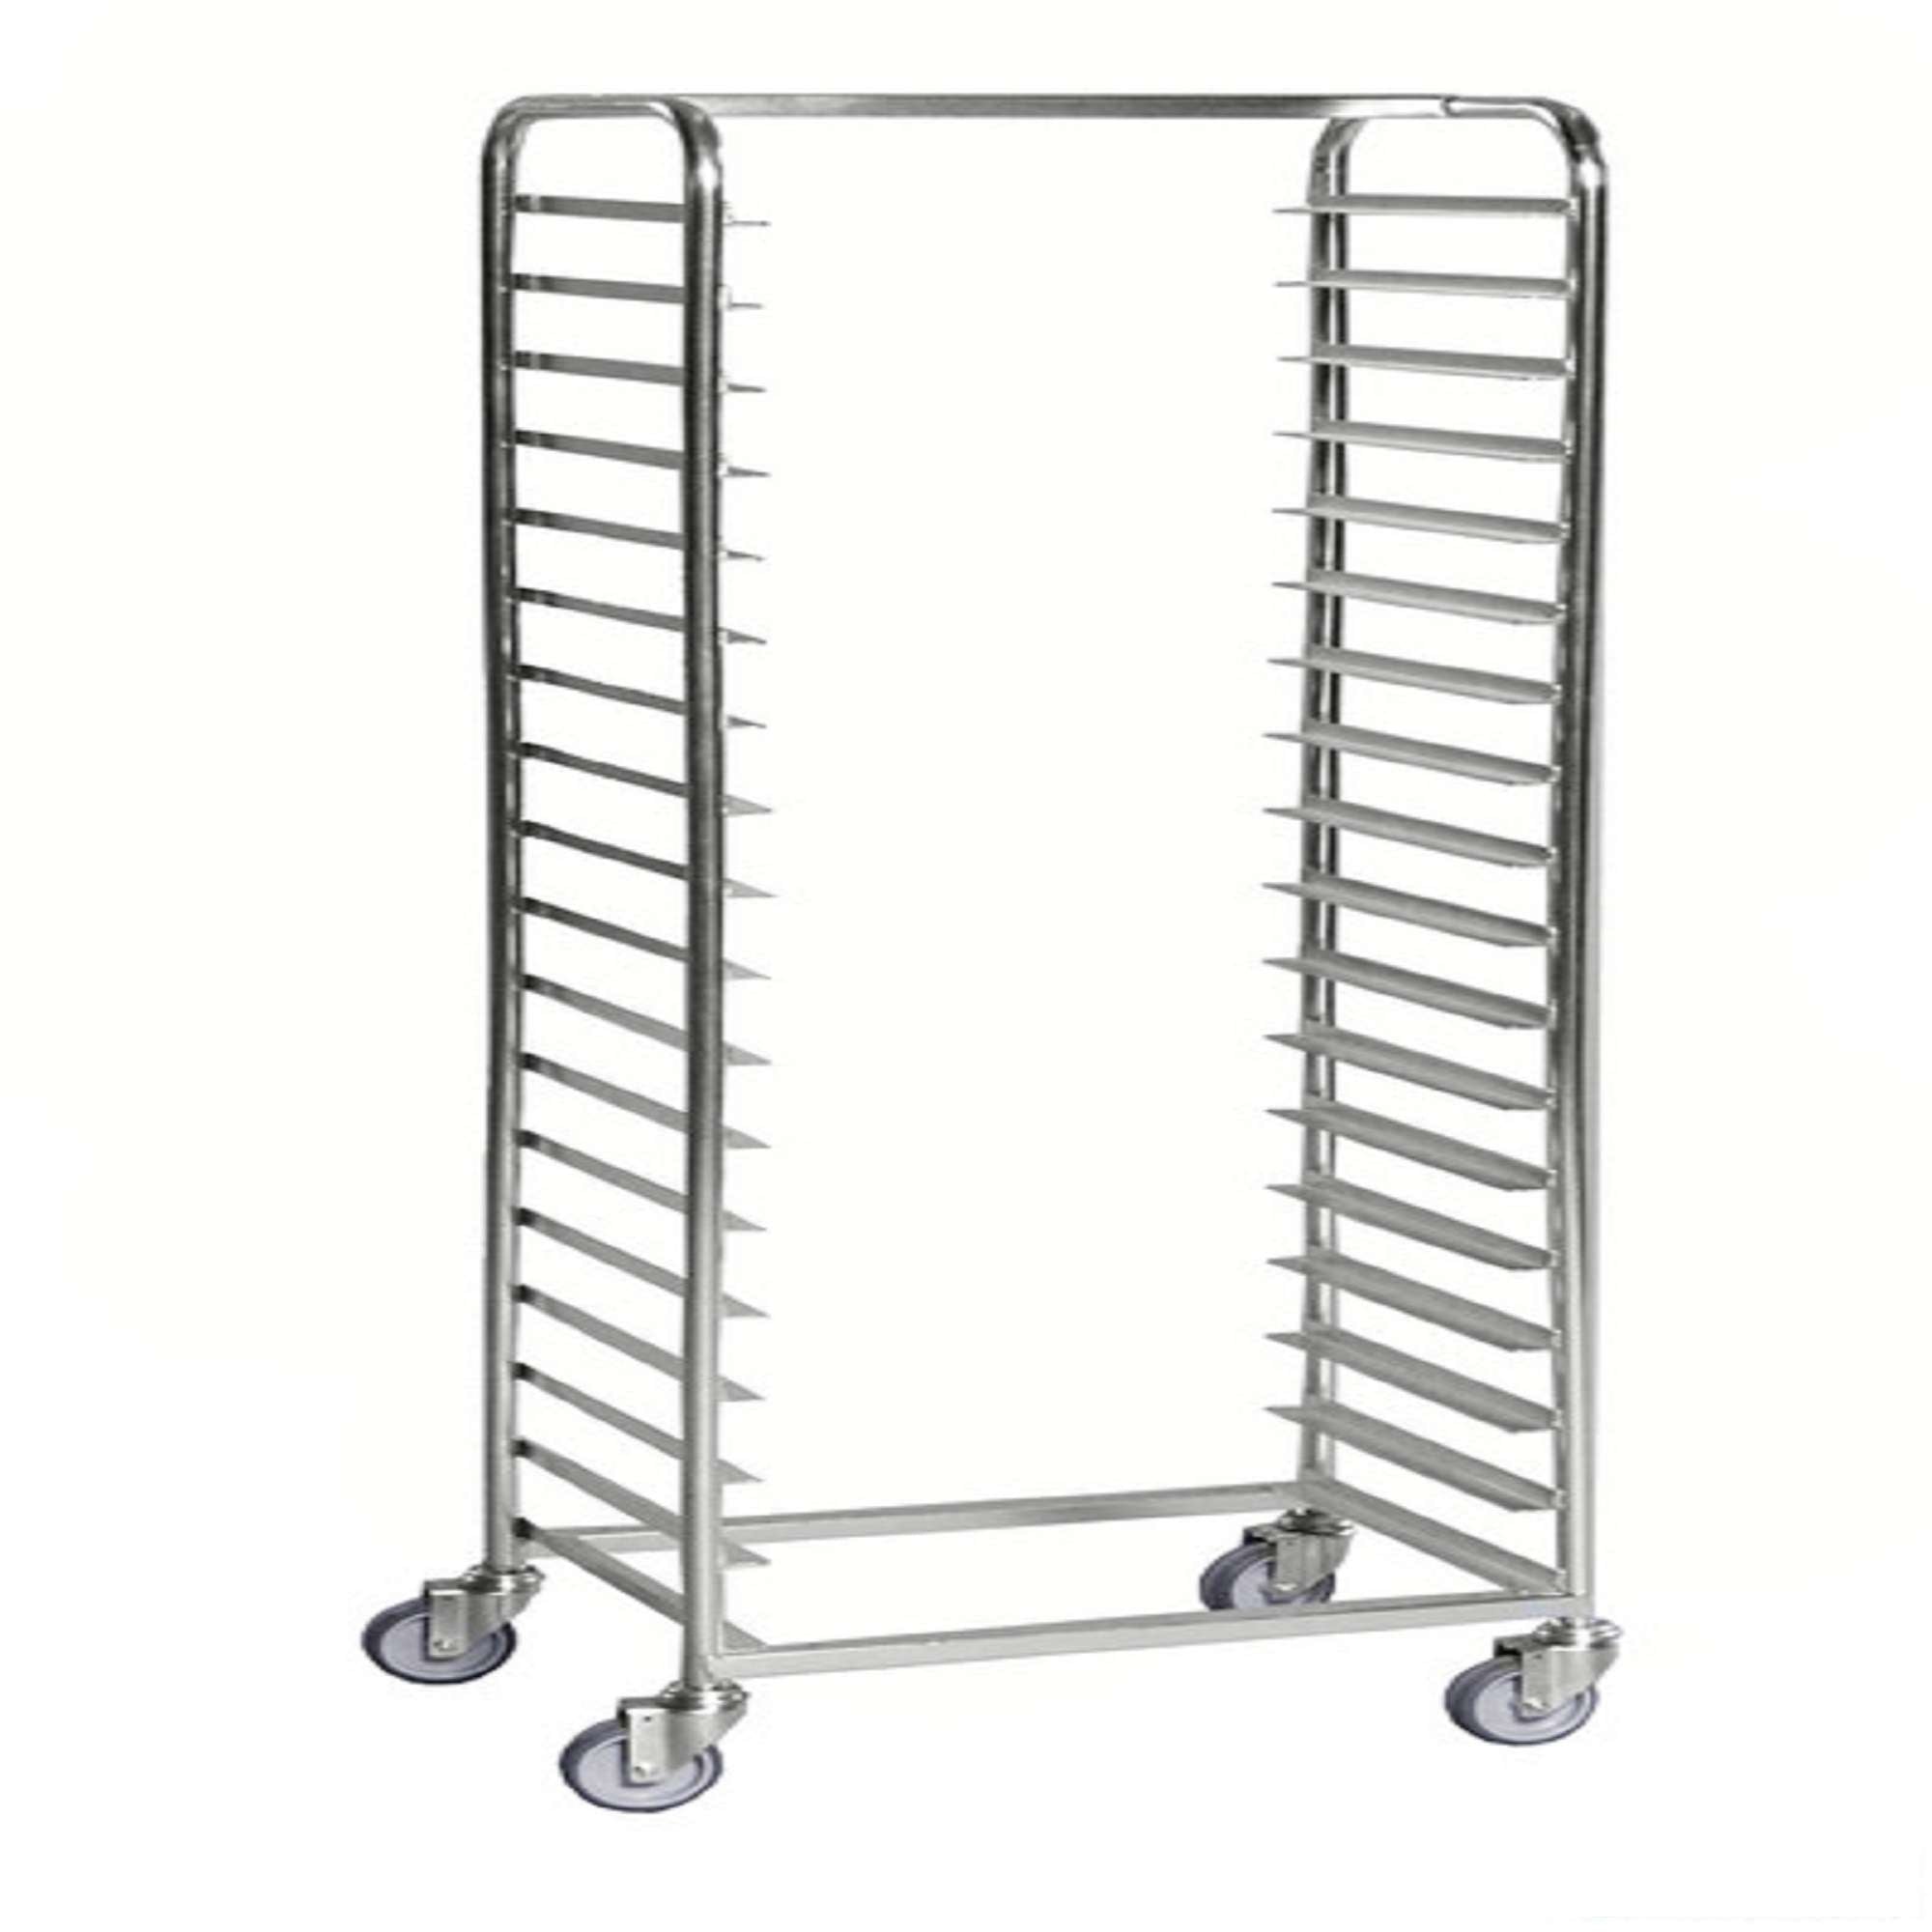 600x440x1880 Tray trolley for 18 trays or plates with measurements 540x440mm